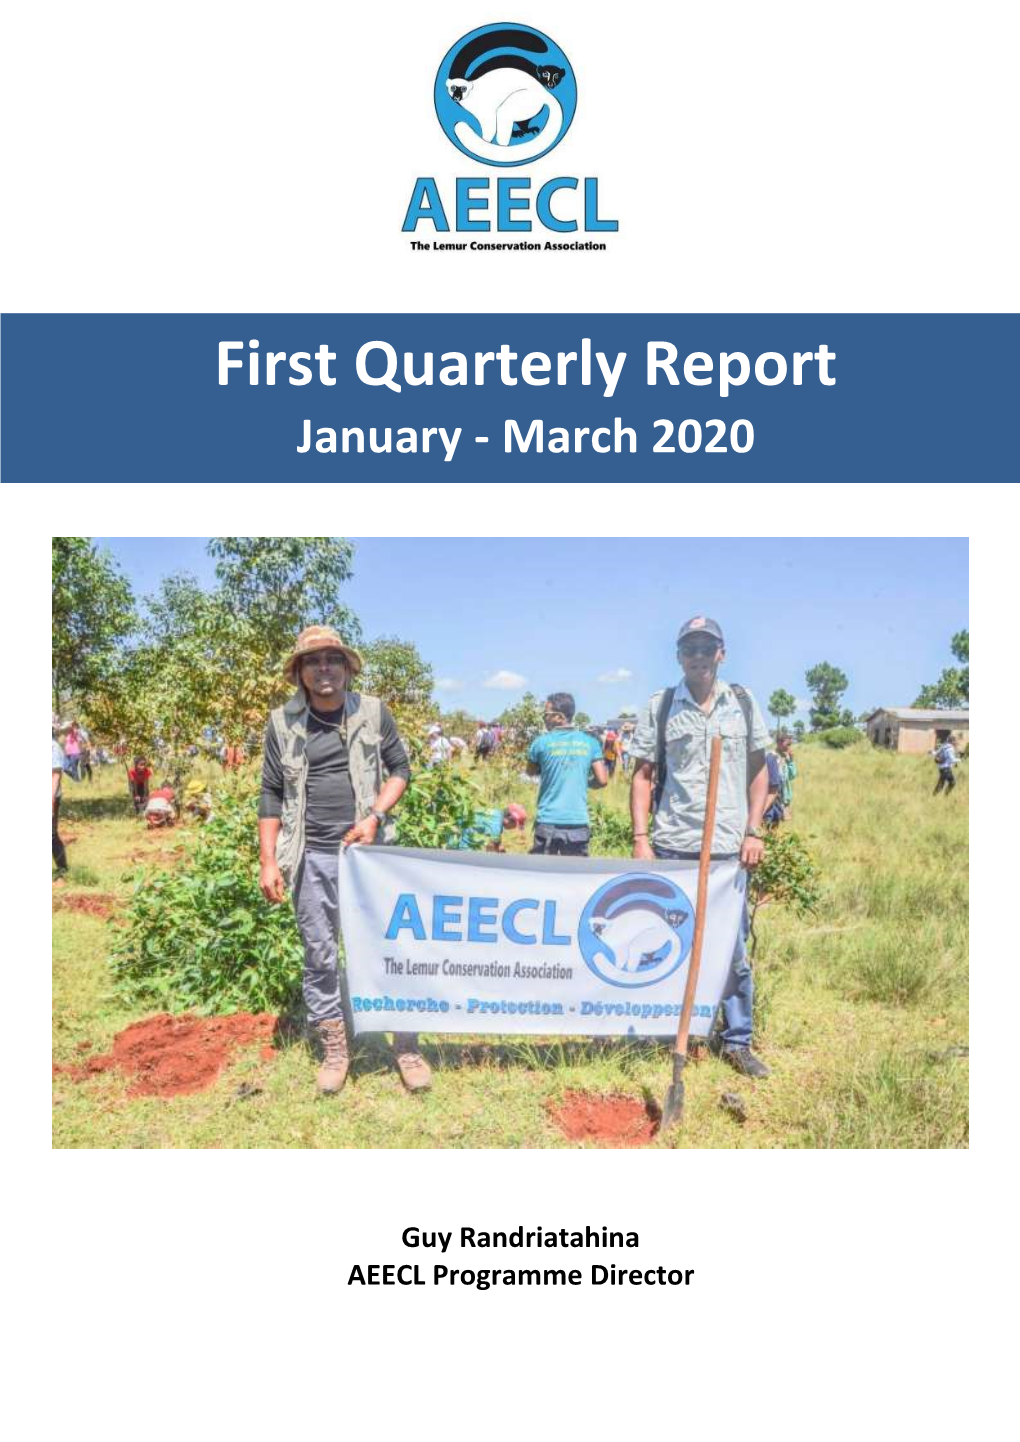 First Quarterly Report January - March 2020